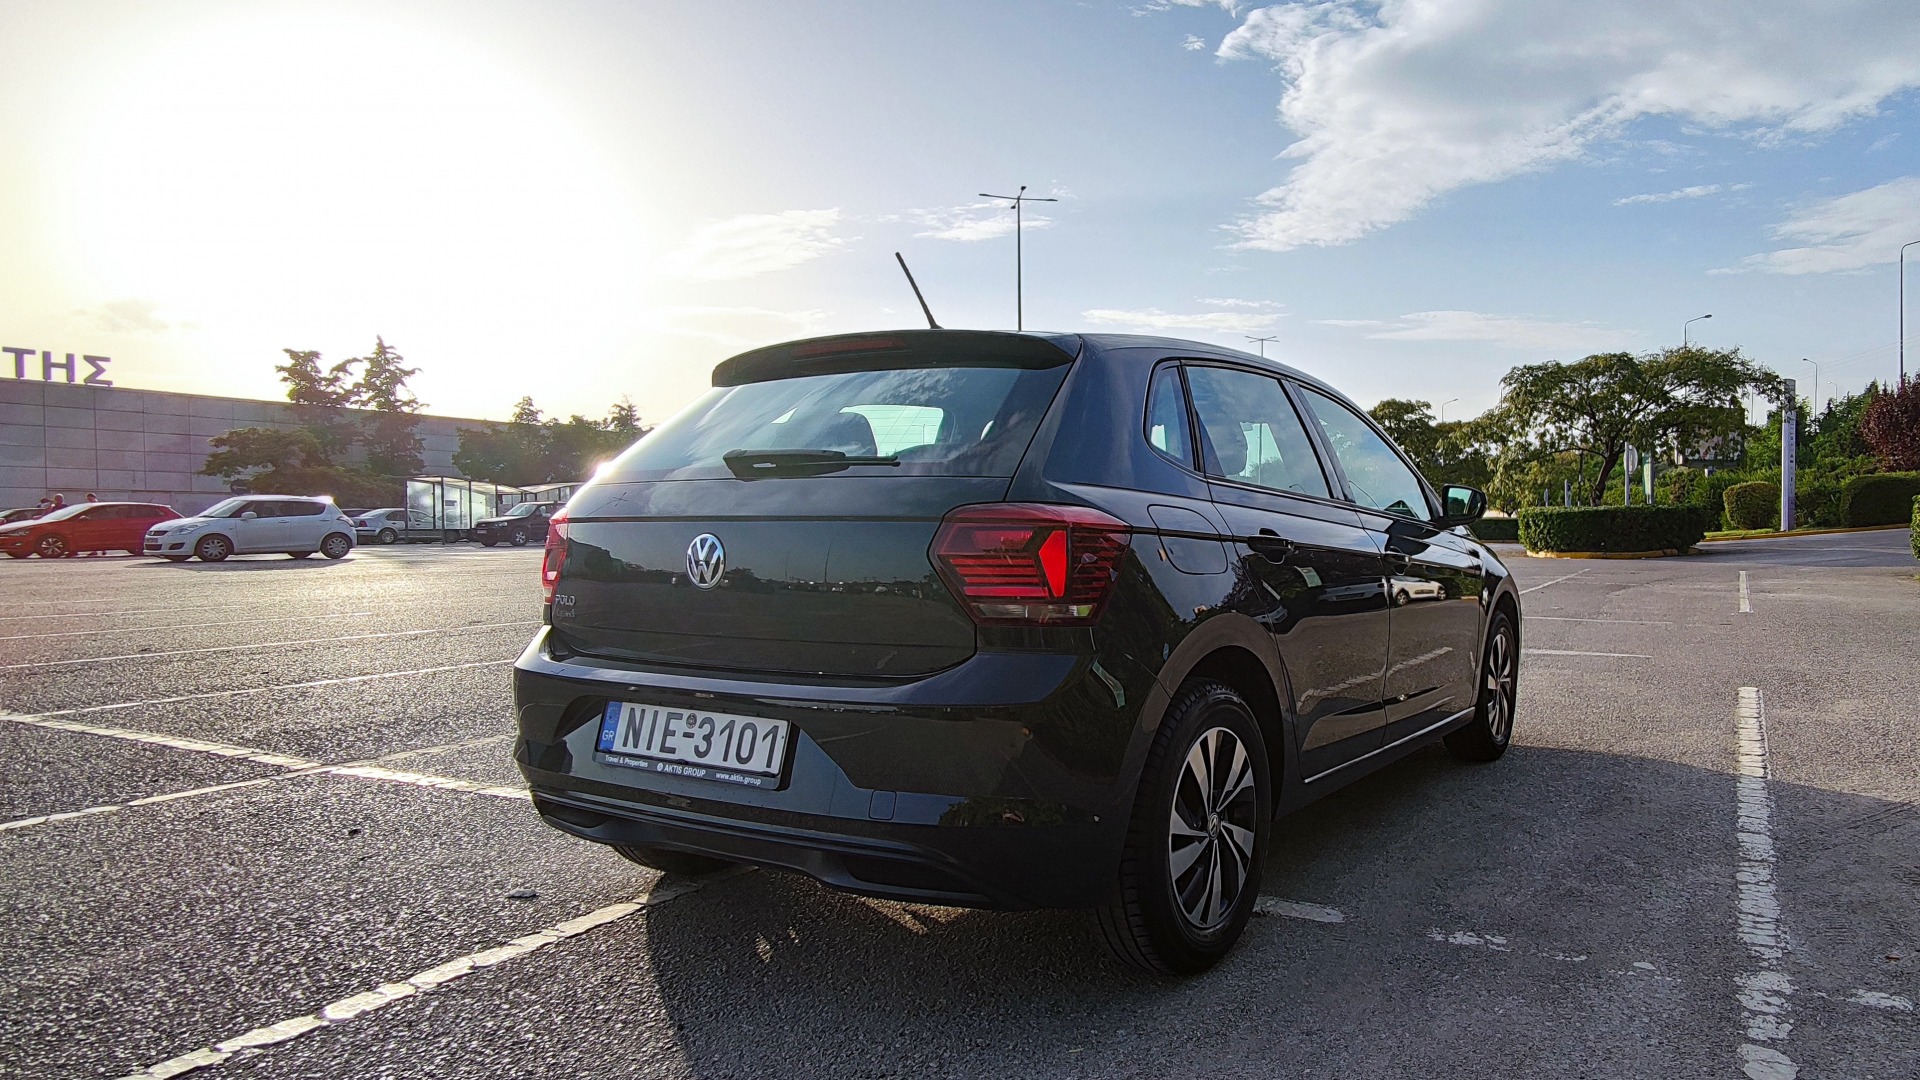 VW Polo. Automatic - Leasing